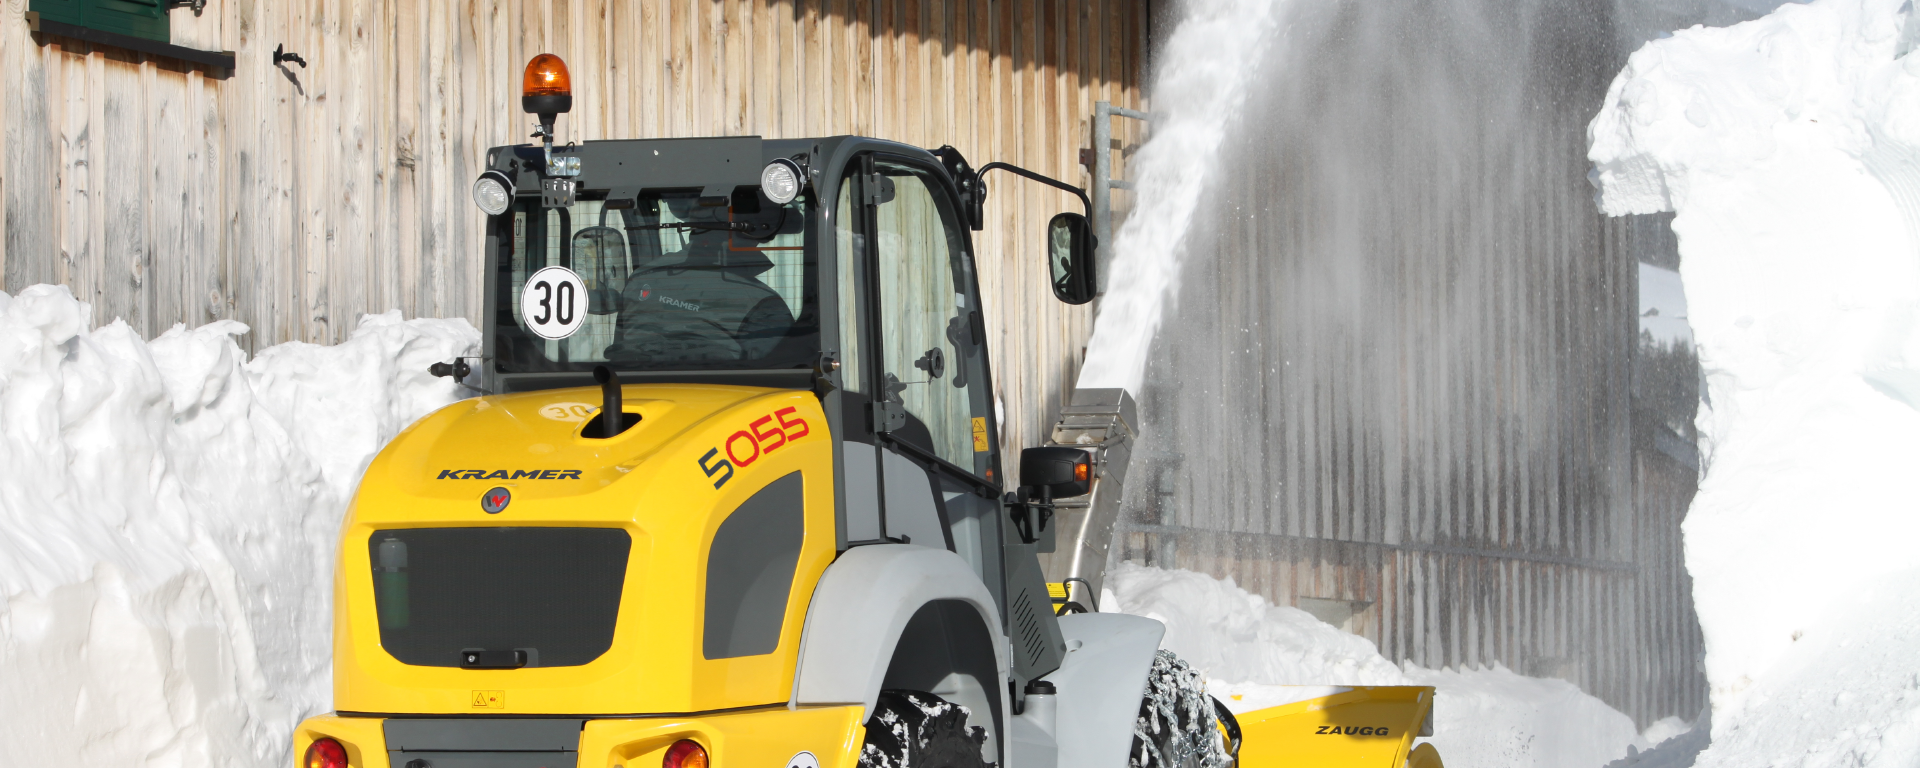 The Kramer wheel loader 5050 while using a snow blower.